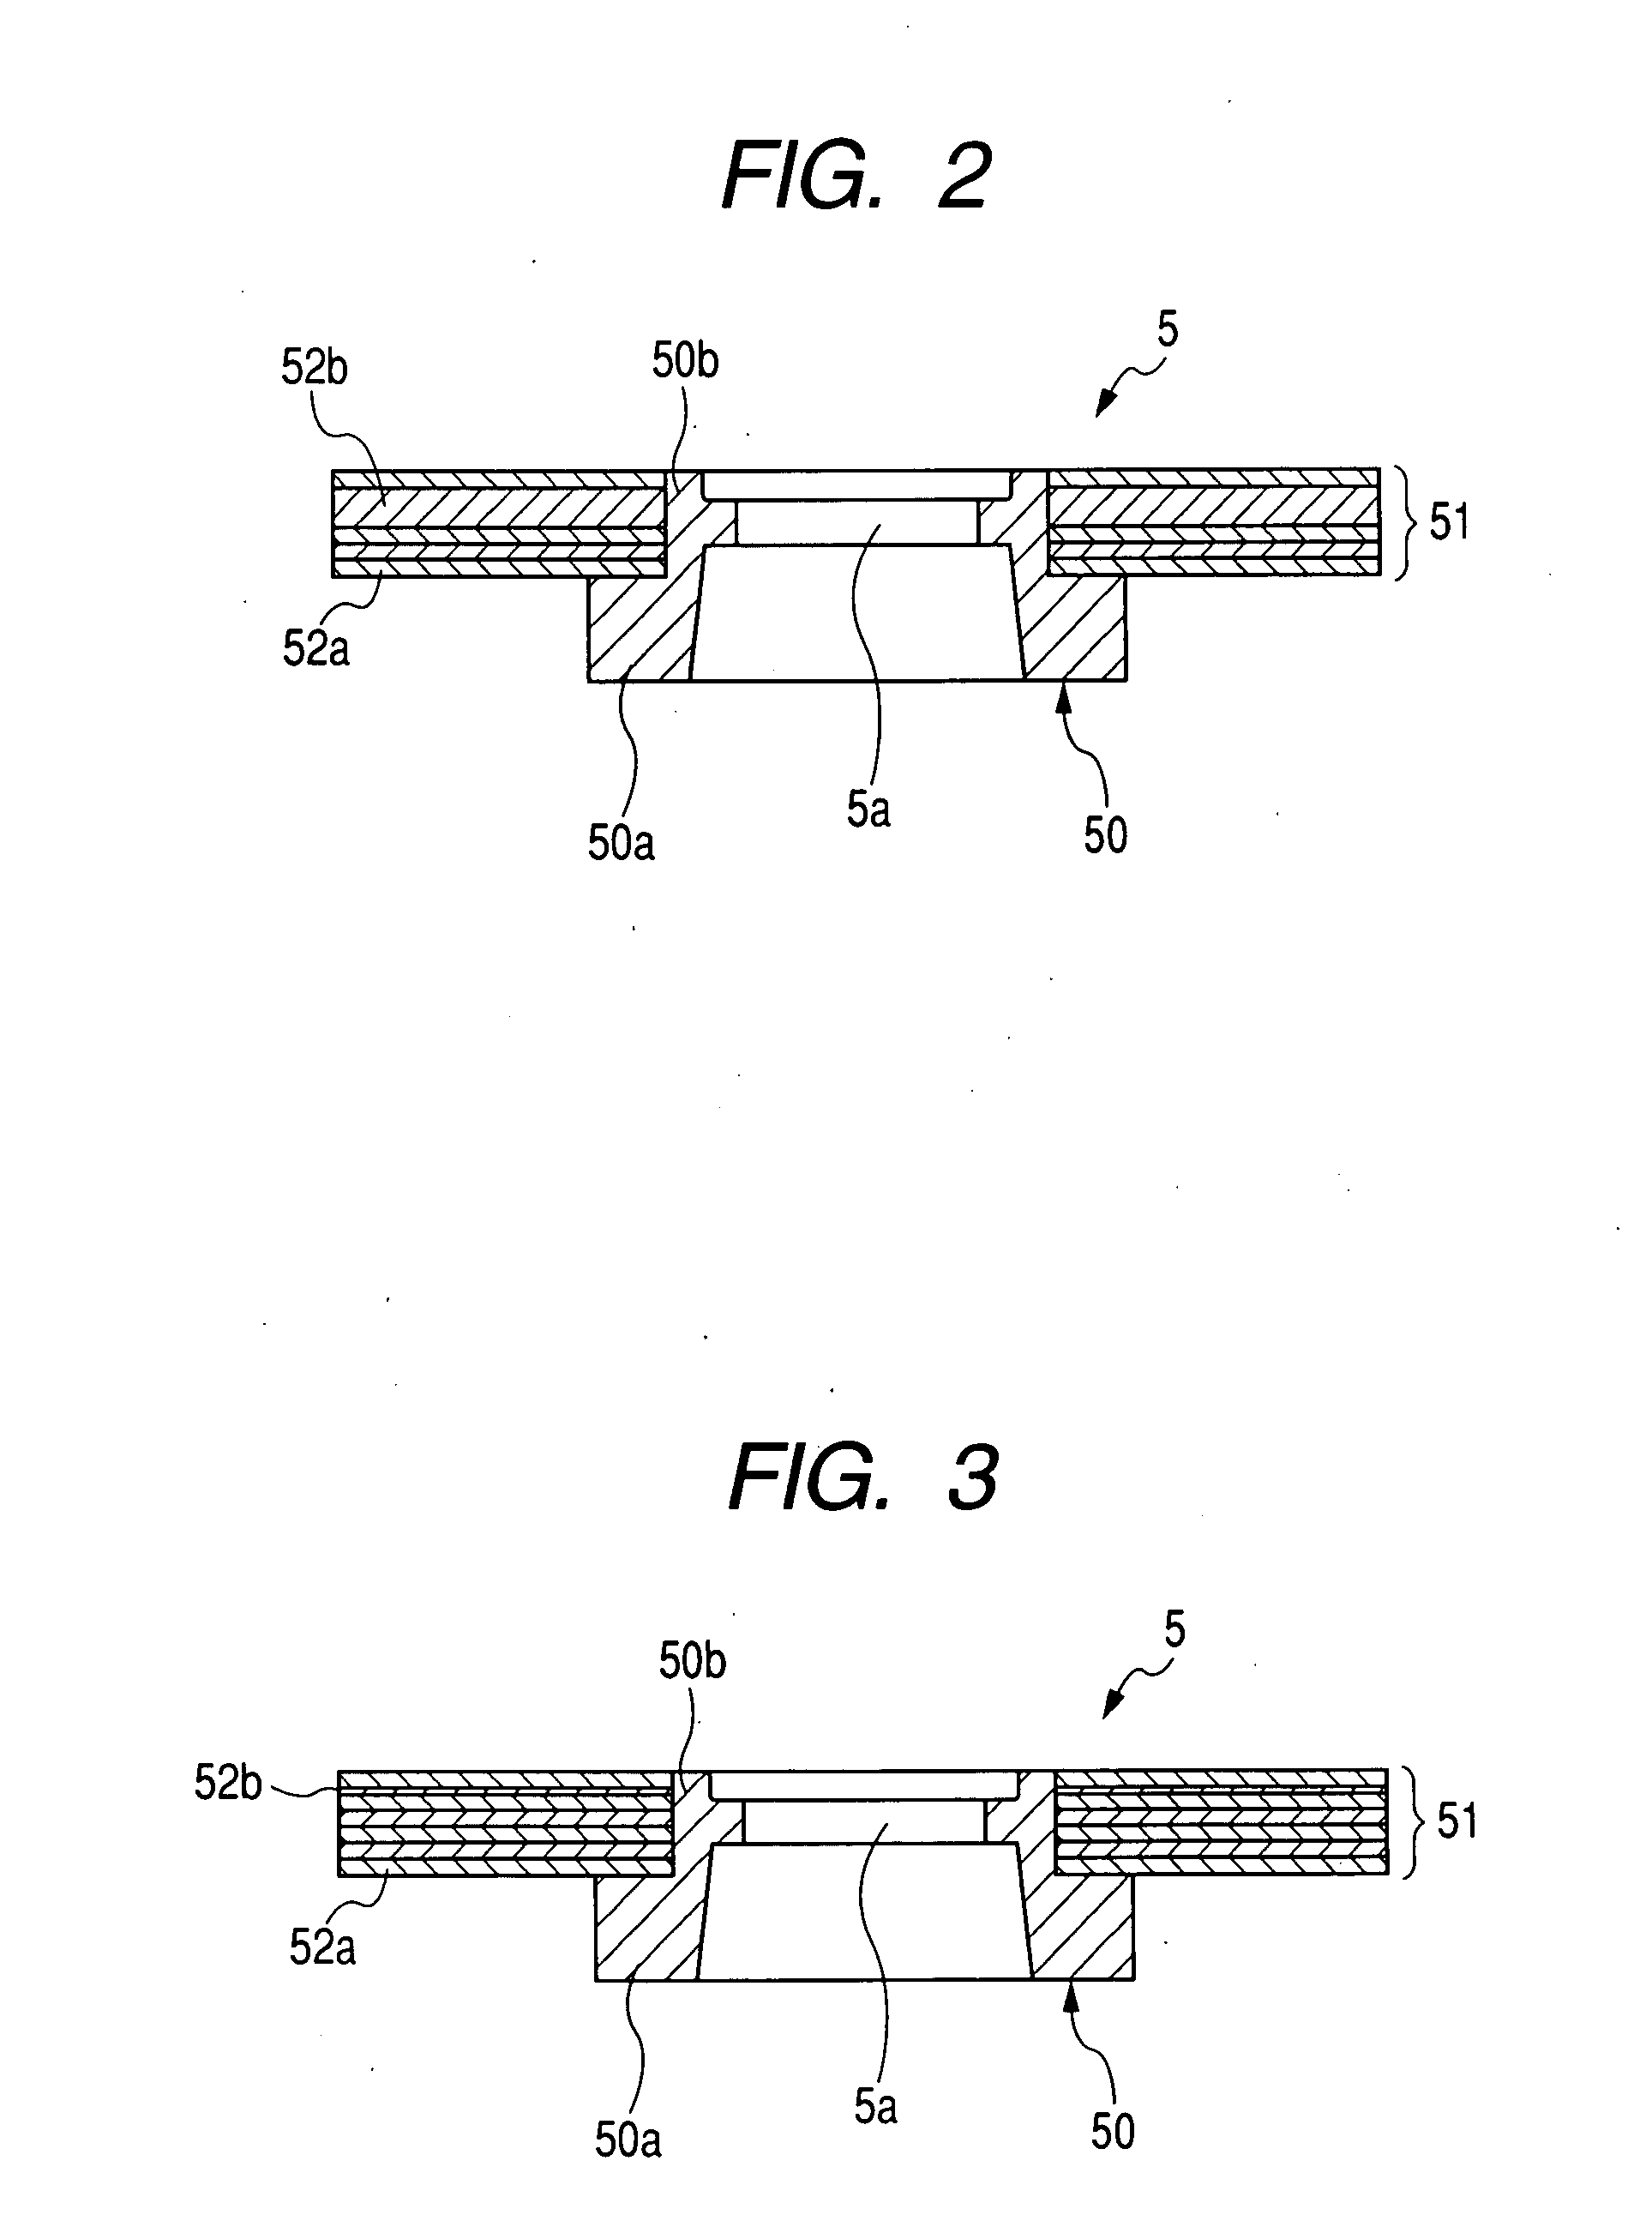 Electromagnetic switch with fixed magnetic core having disc portion formed of stack of base and balance metal sheets